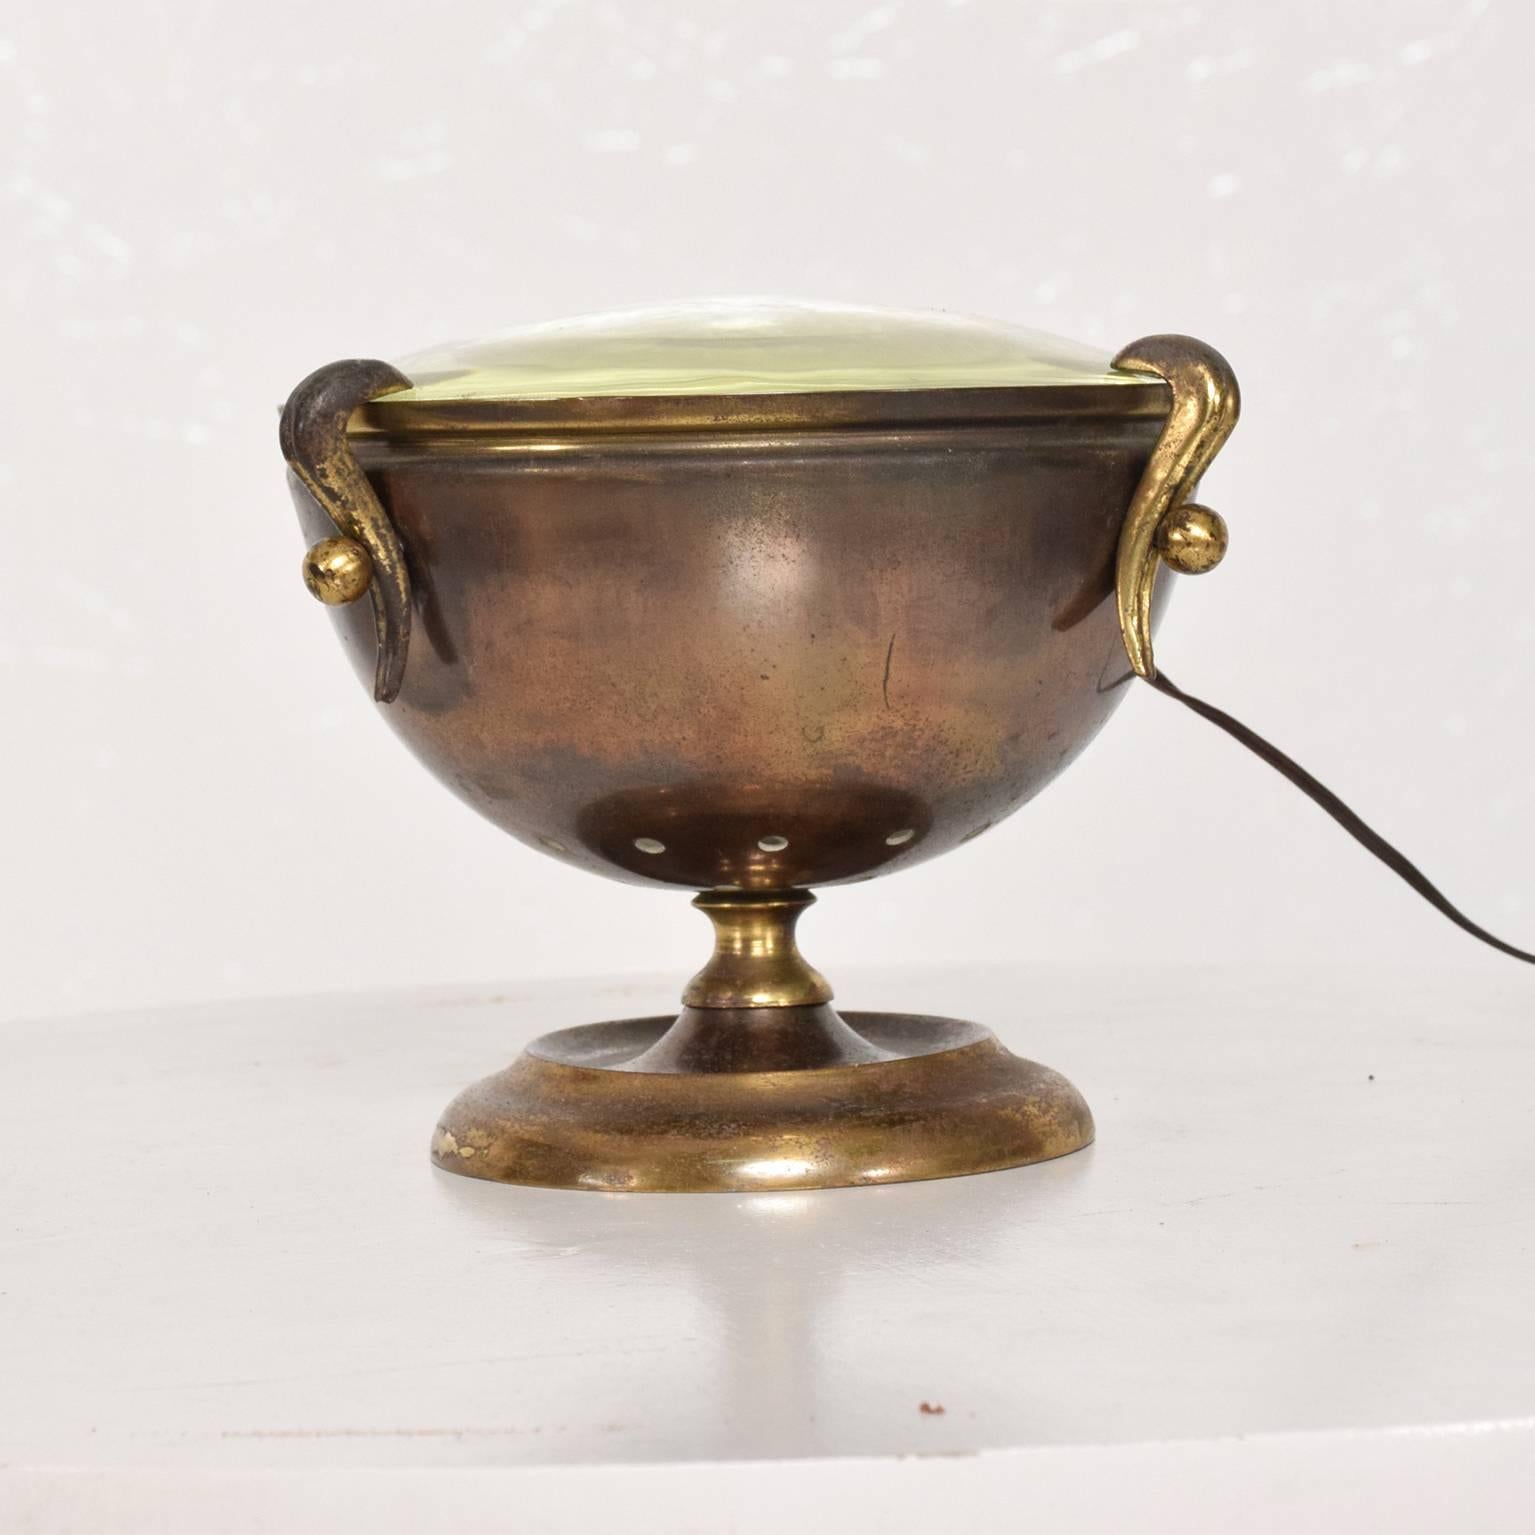 For your consideration a brass table in the shape of an urn.
Magnifying glass top.
Rewired. No information on the maker. No label present. Italy, circa 1950s.
Dimensions: 4 1/2